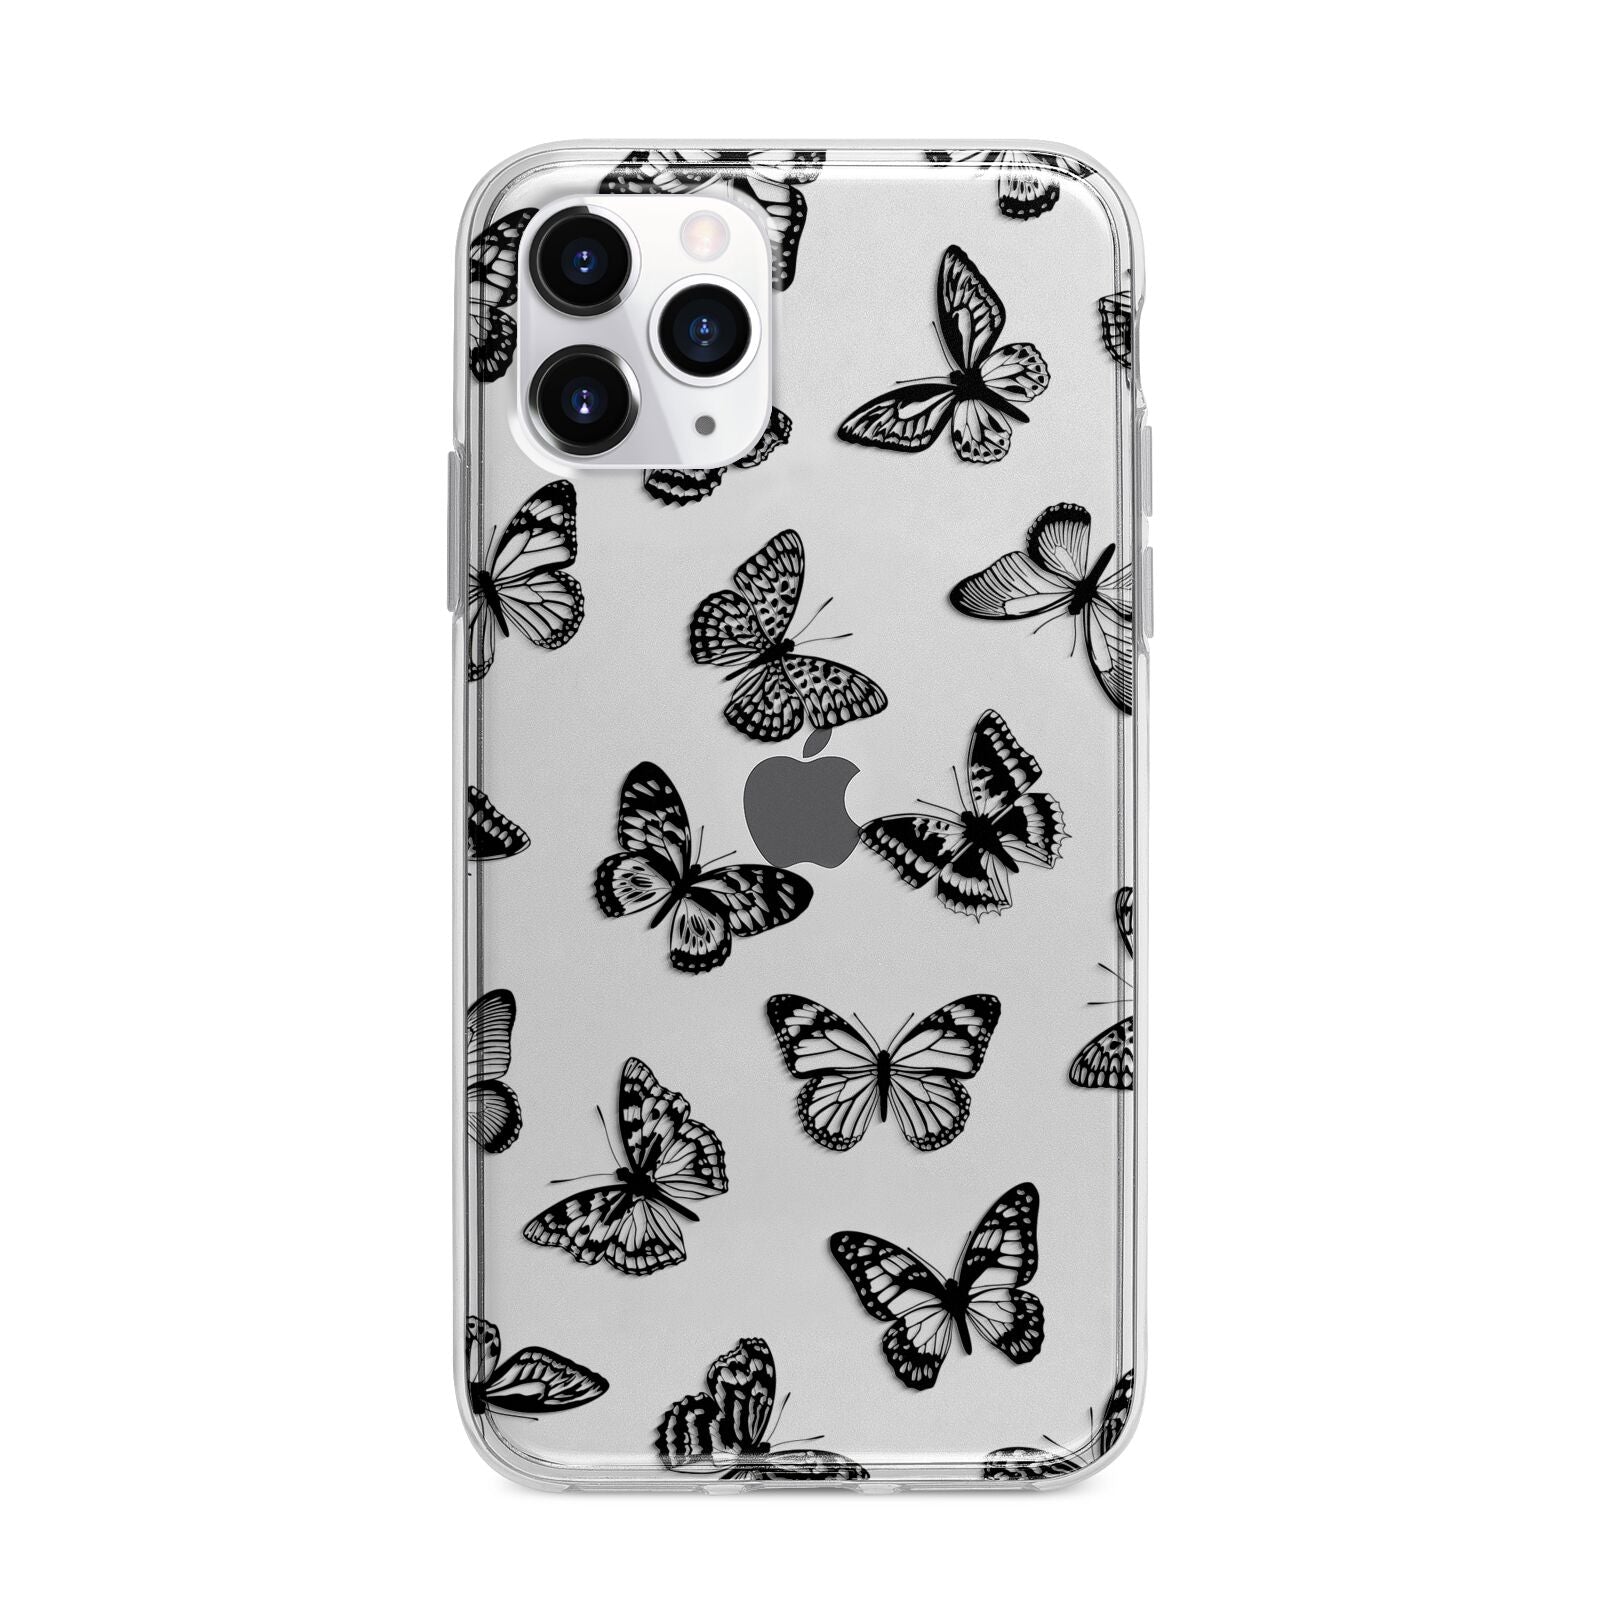 Butterfly Apple iPhone 11 Pro Max in Silver with Bumper Case